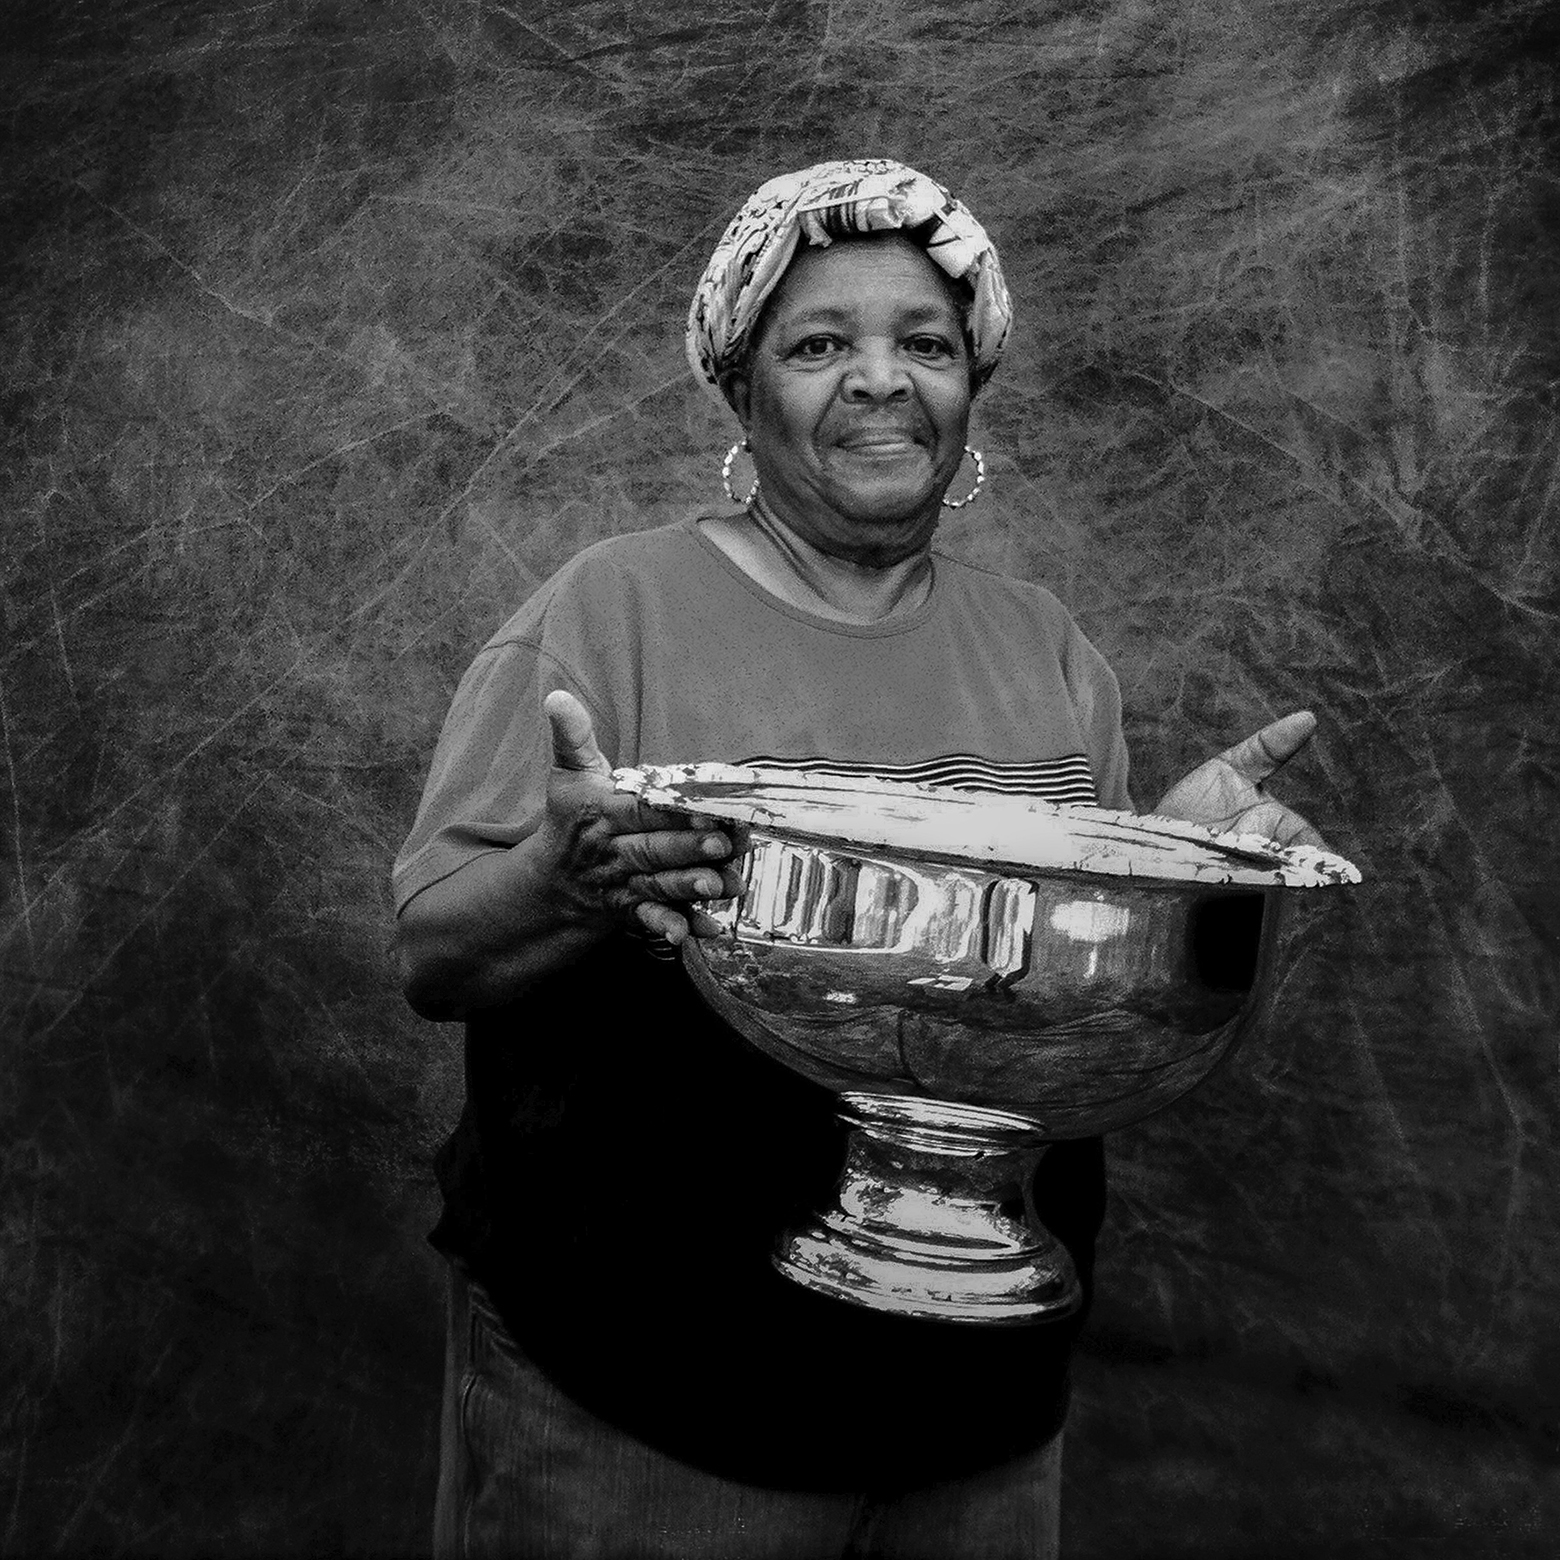 A woman wearing a T-shirt and a headscarf and hoop earrings holds up a large, footed, metal punch bowl.